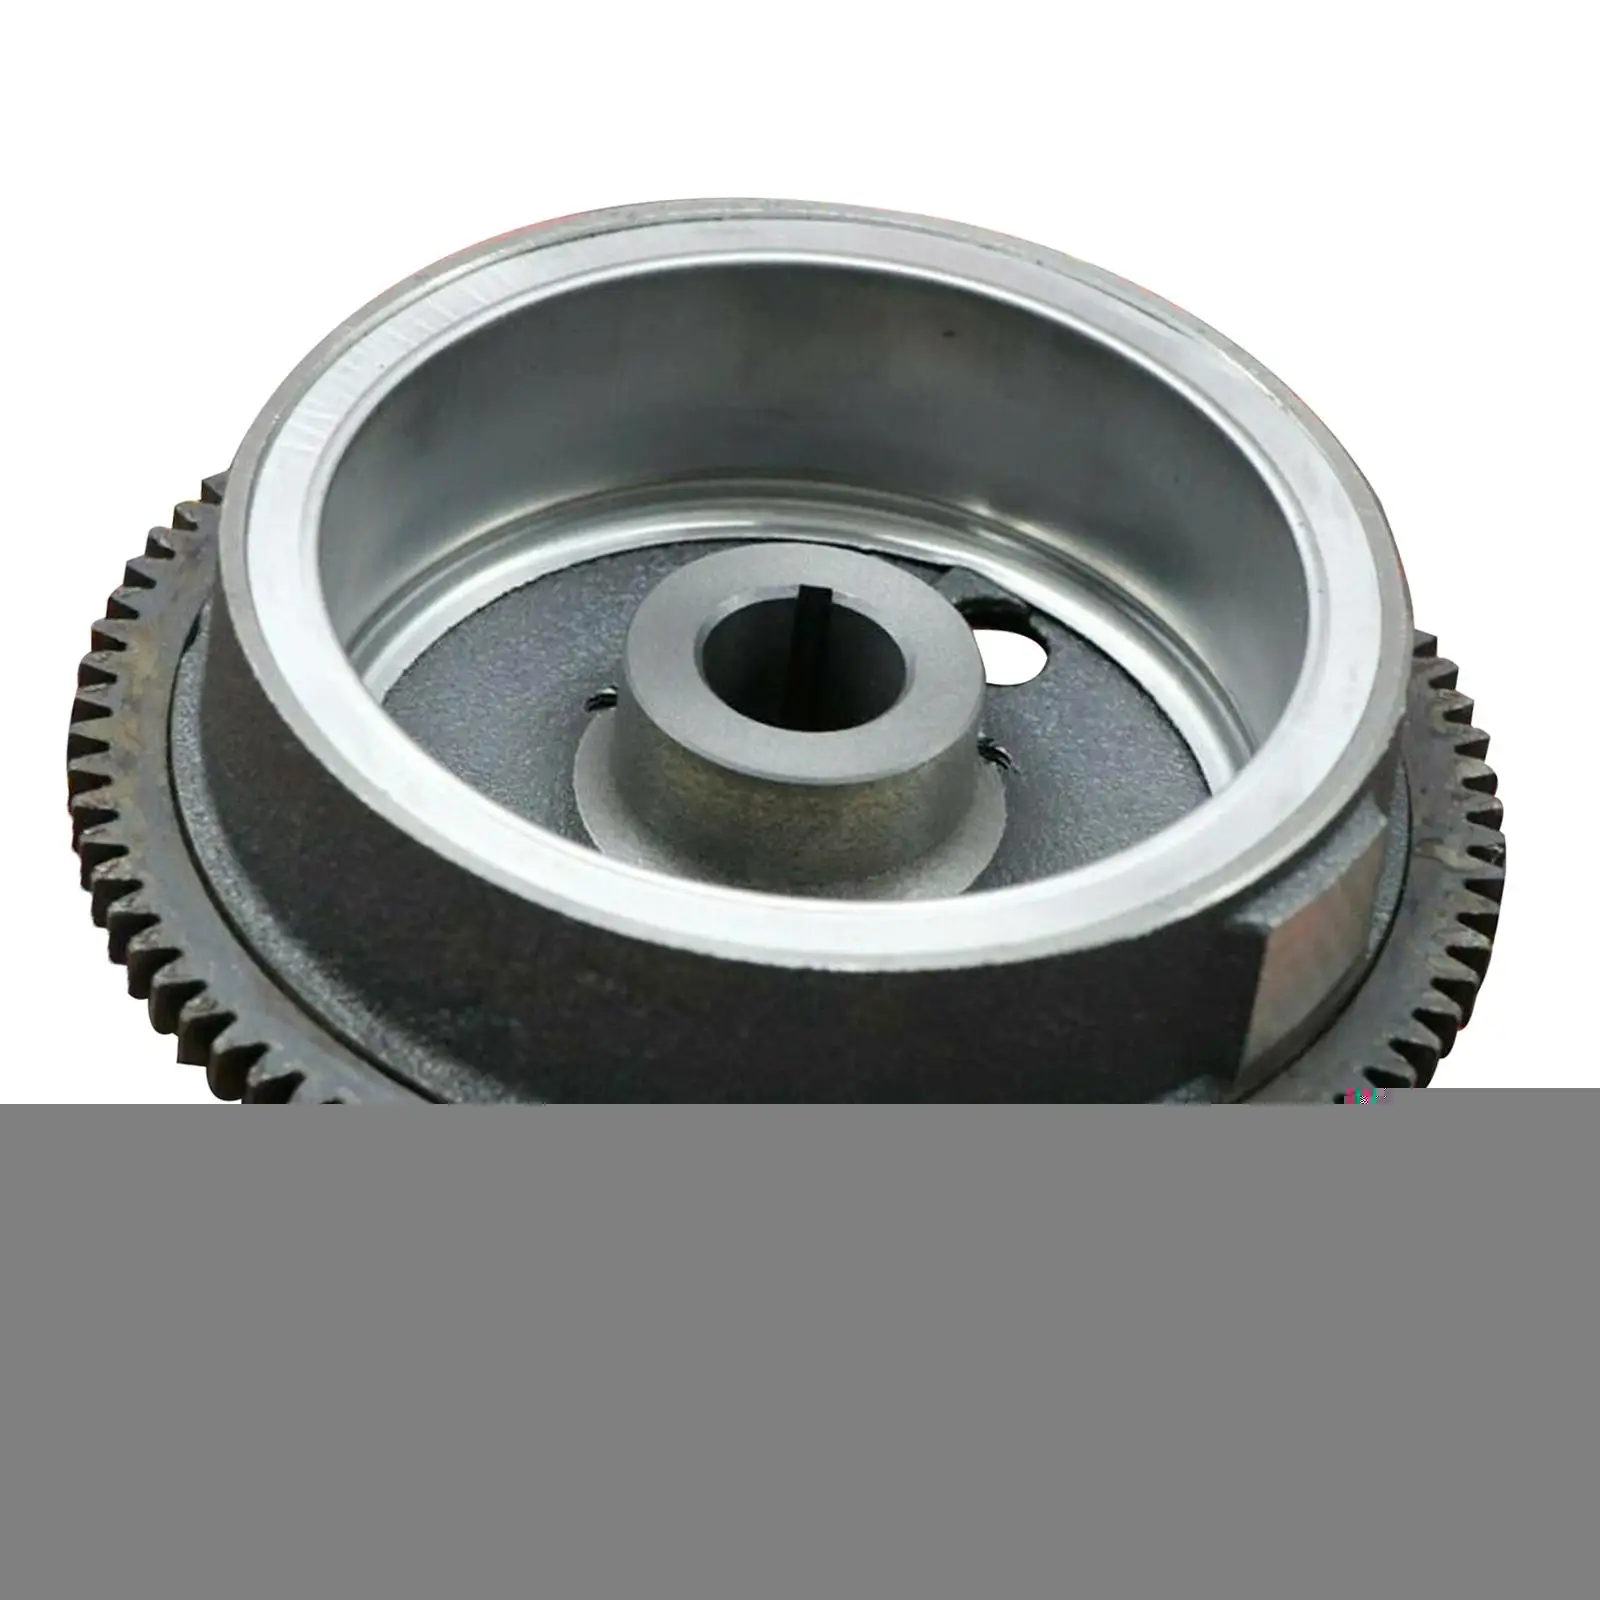  Fly Wheel Motors Engines Supplies Flywheel Replacement Fits for